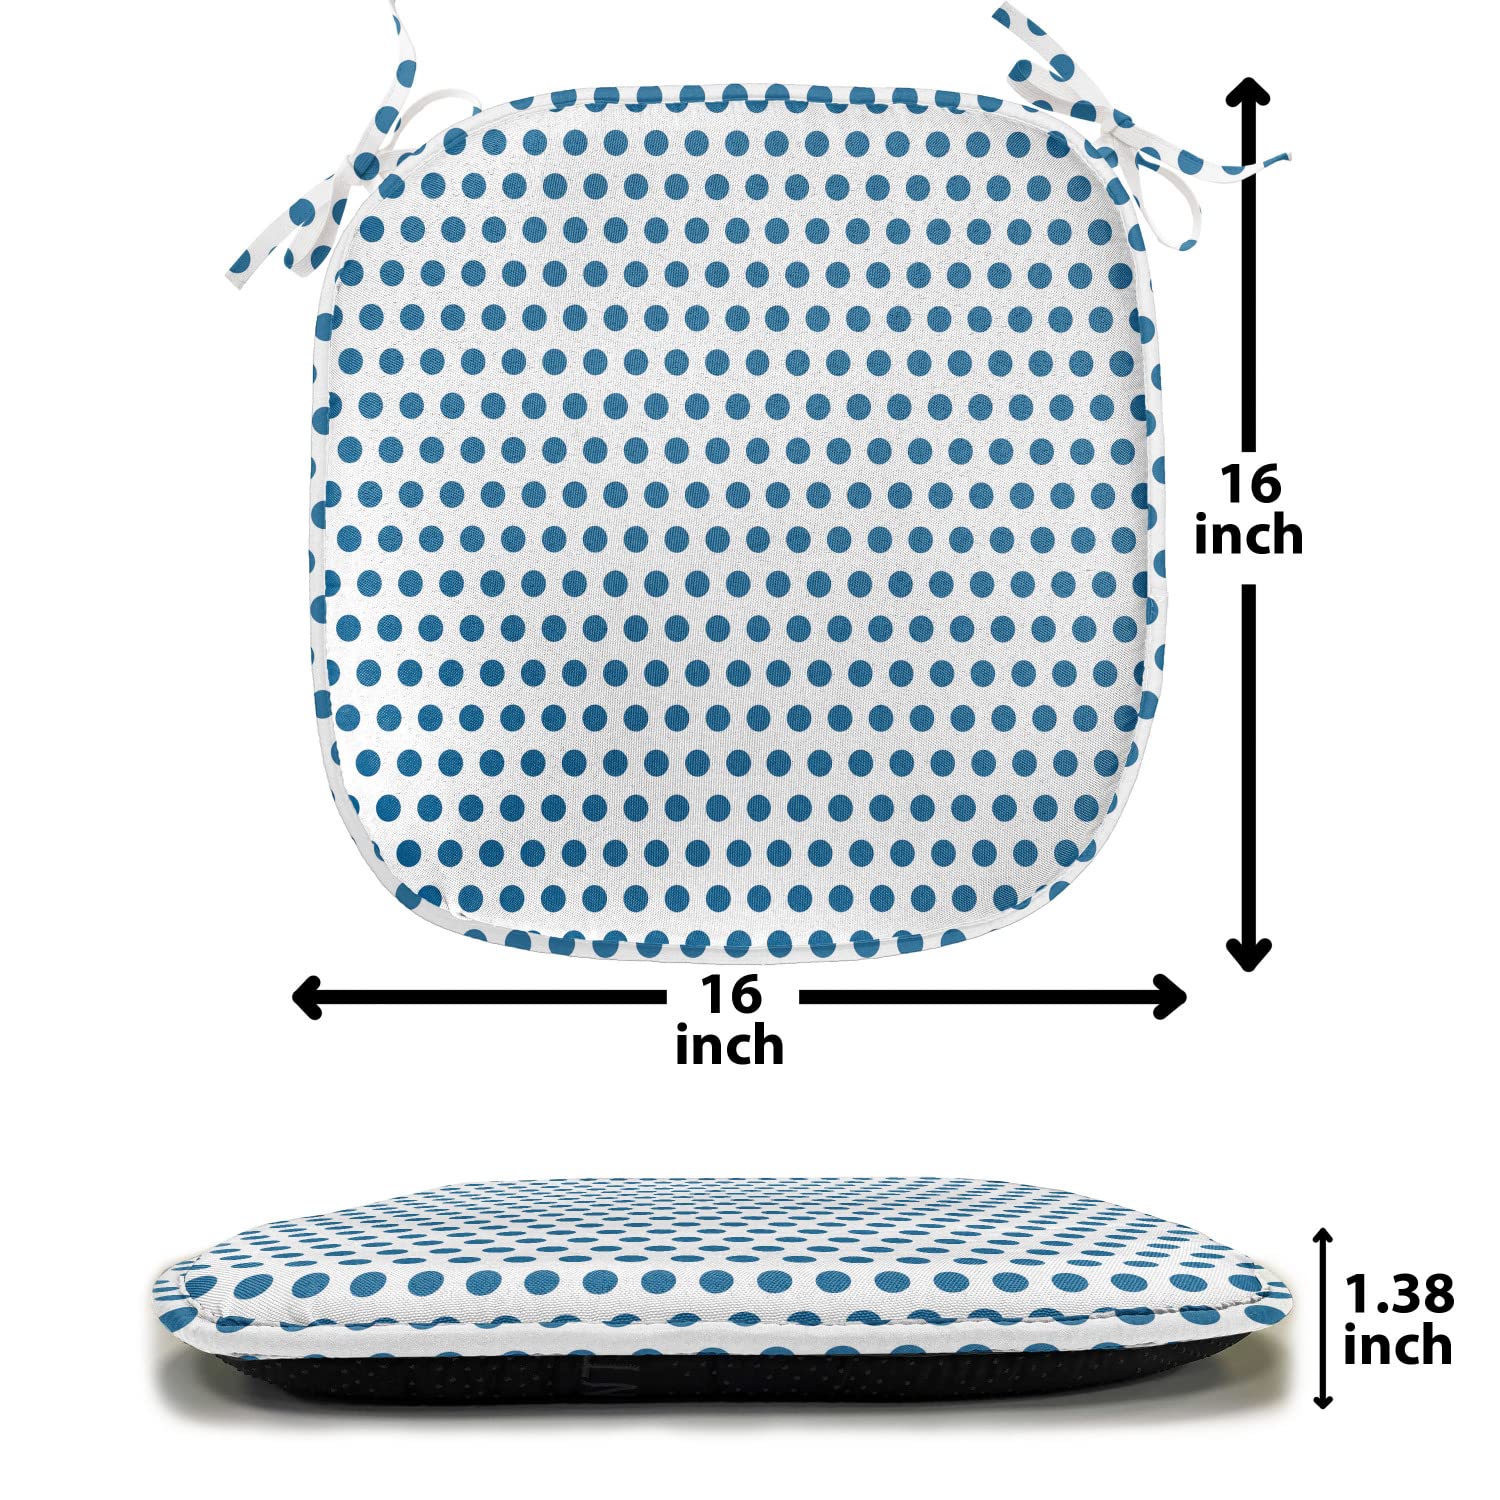 Lunarable Vintage Chair Seating Cushion Set of 2, Retro Polka Dots Navy Blue Circles Pop Art 50s 60s Picnic Inspired Image, Anti-Slip Seat Padding for Kitchen & Patio, 16"x16", Dark Blue and White